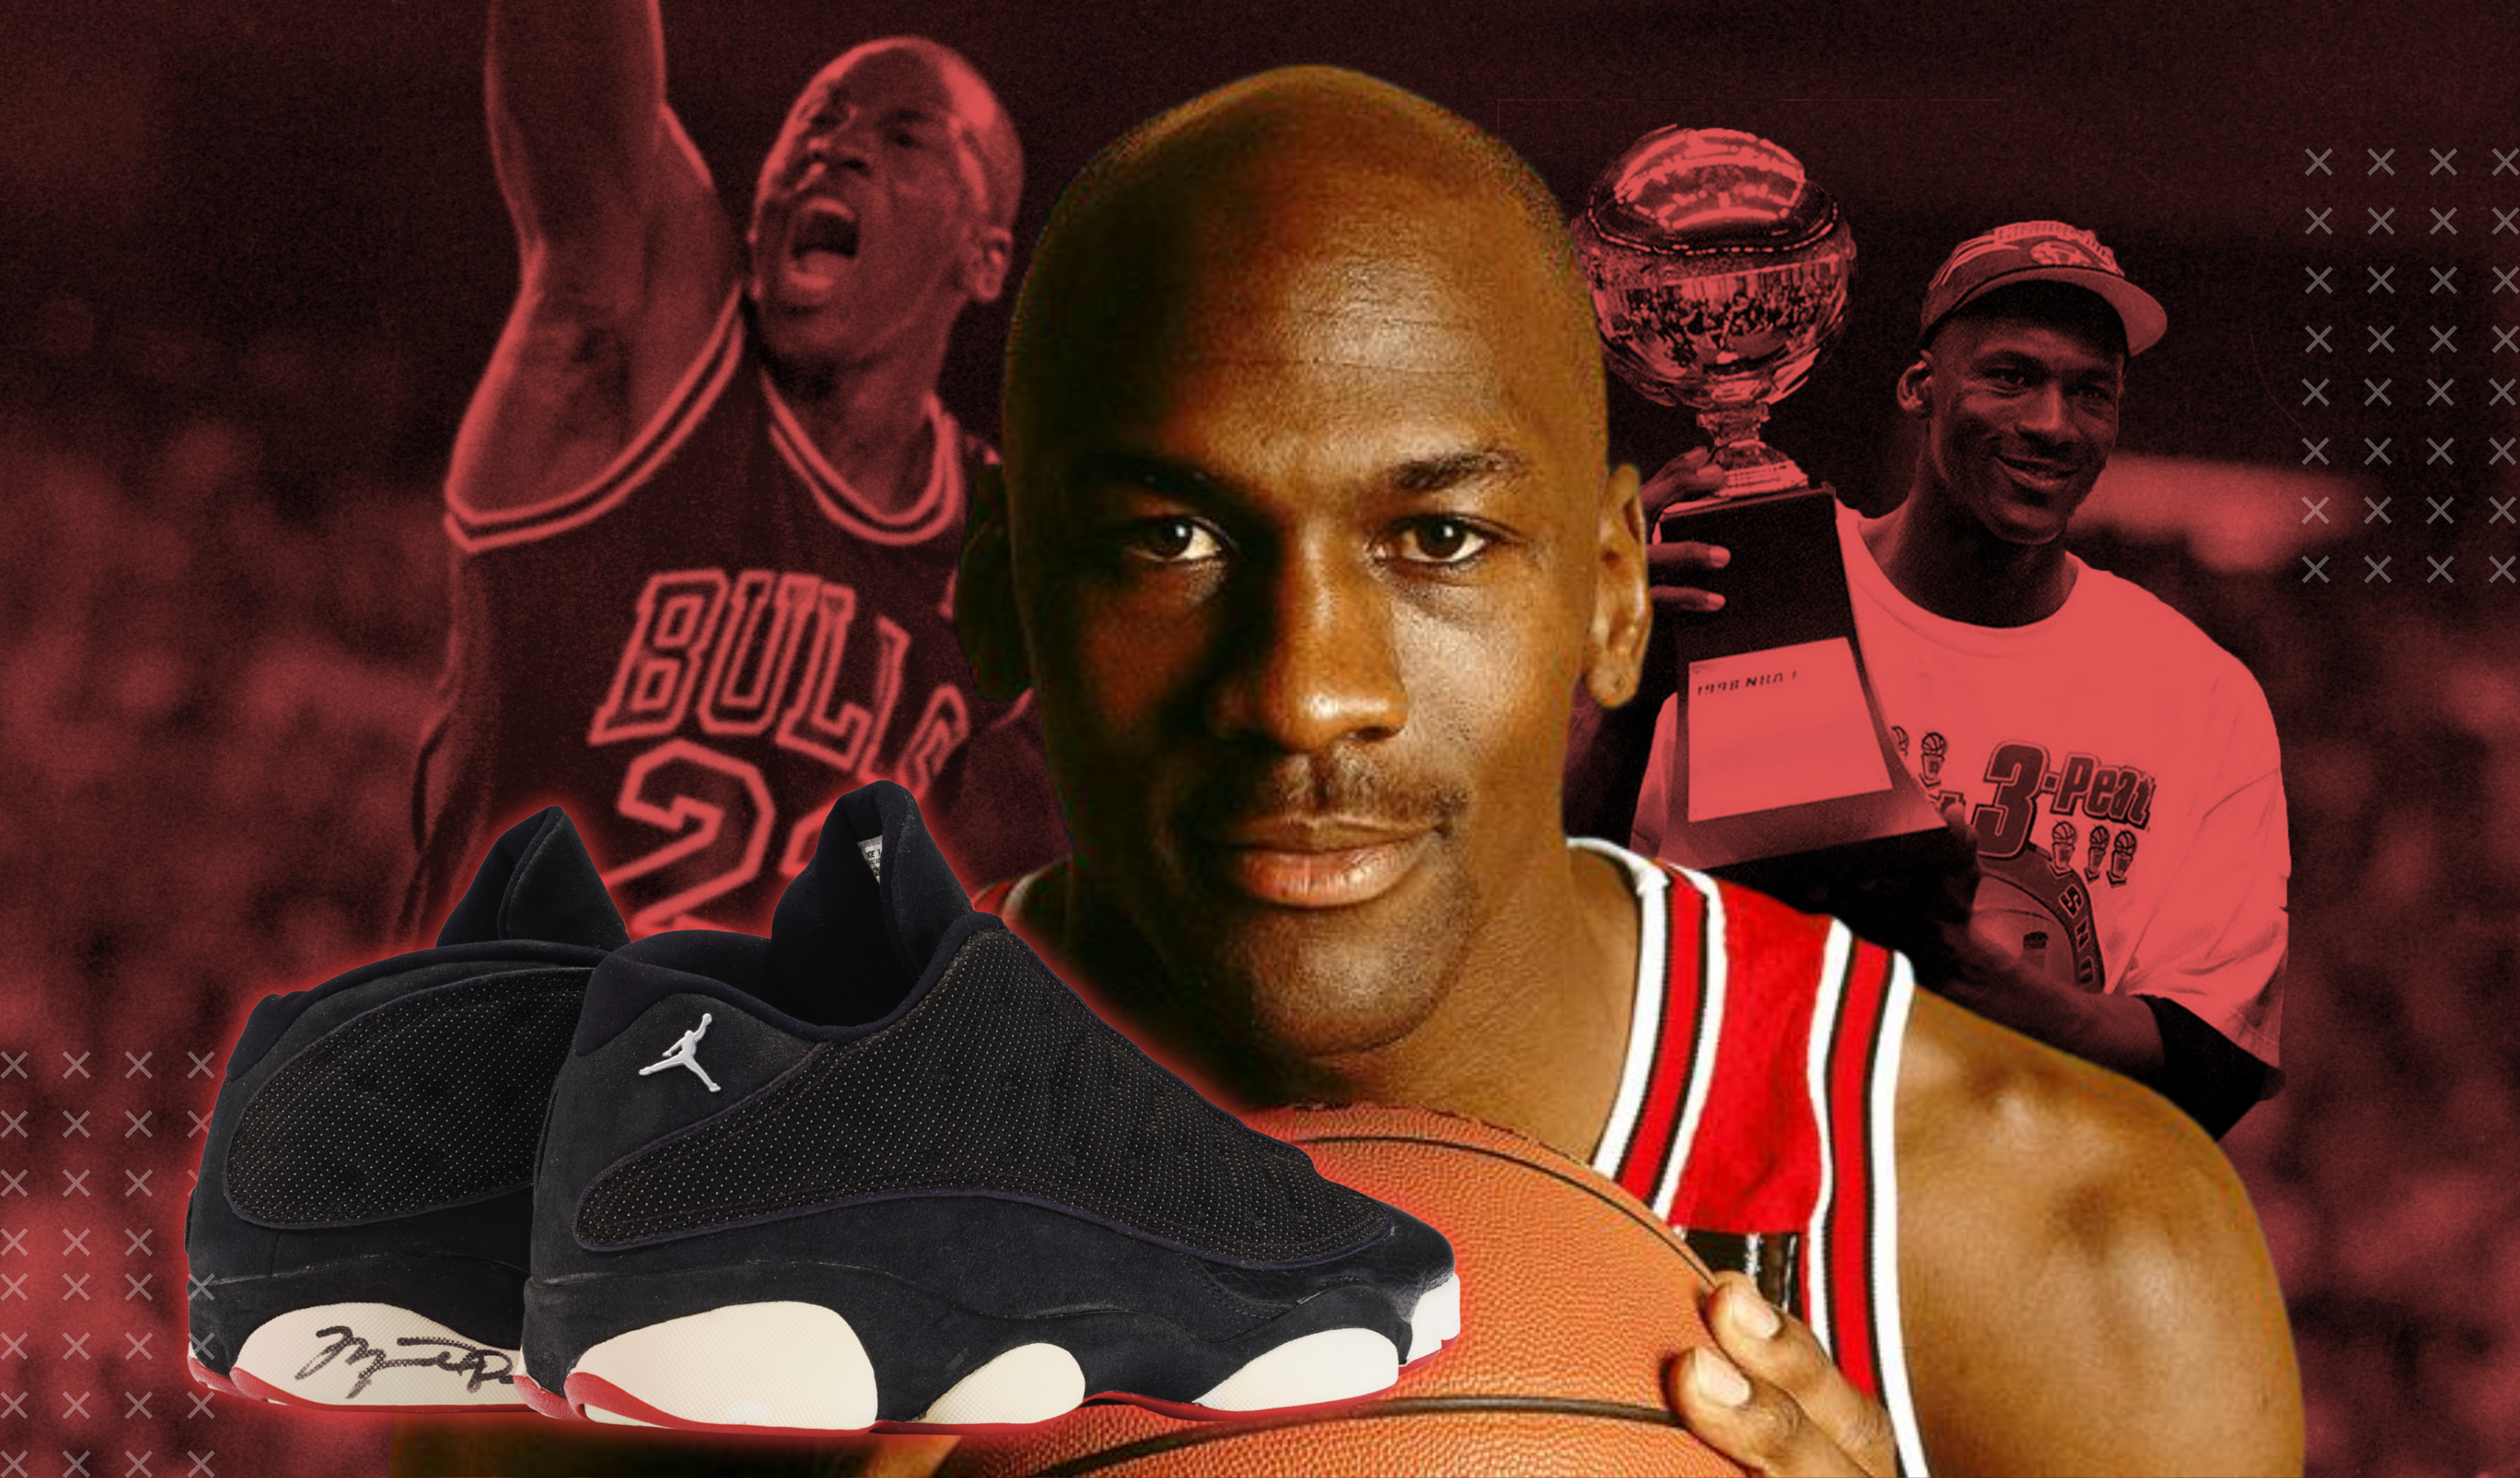 Michael Jordan wins easily in first round of fantasy one-on-one 